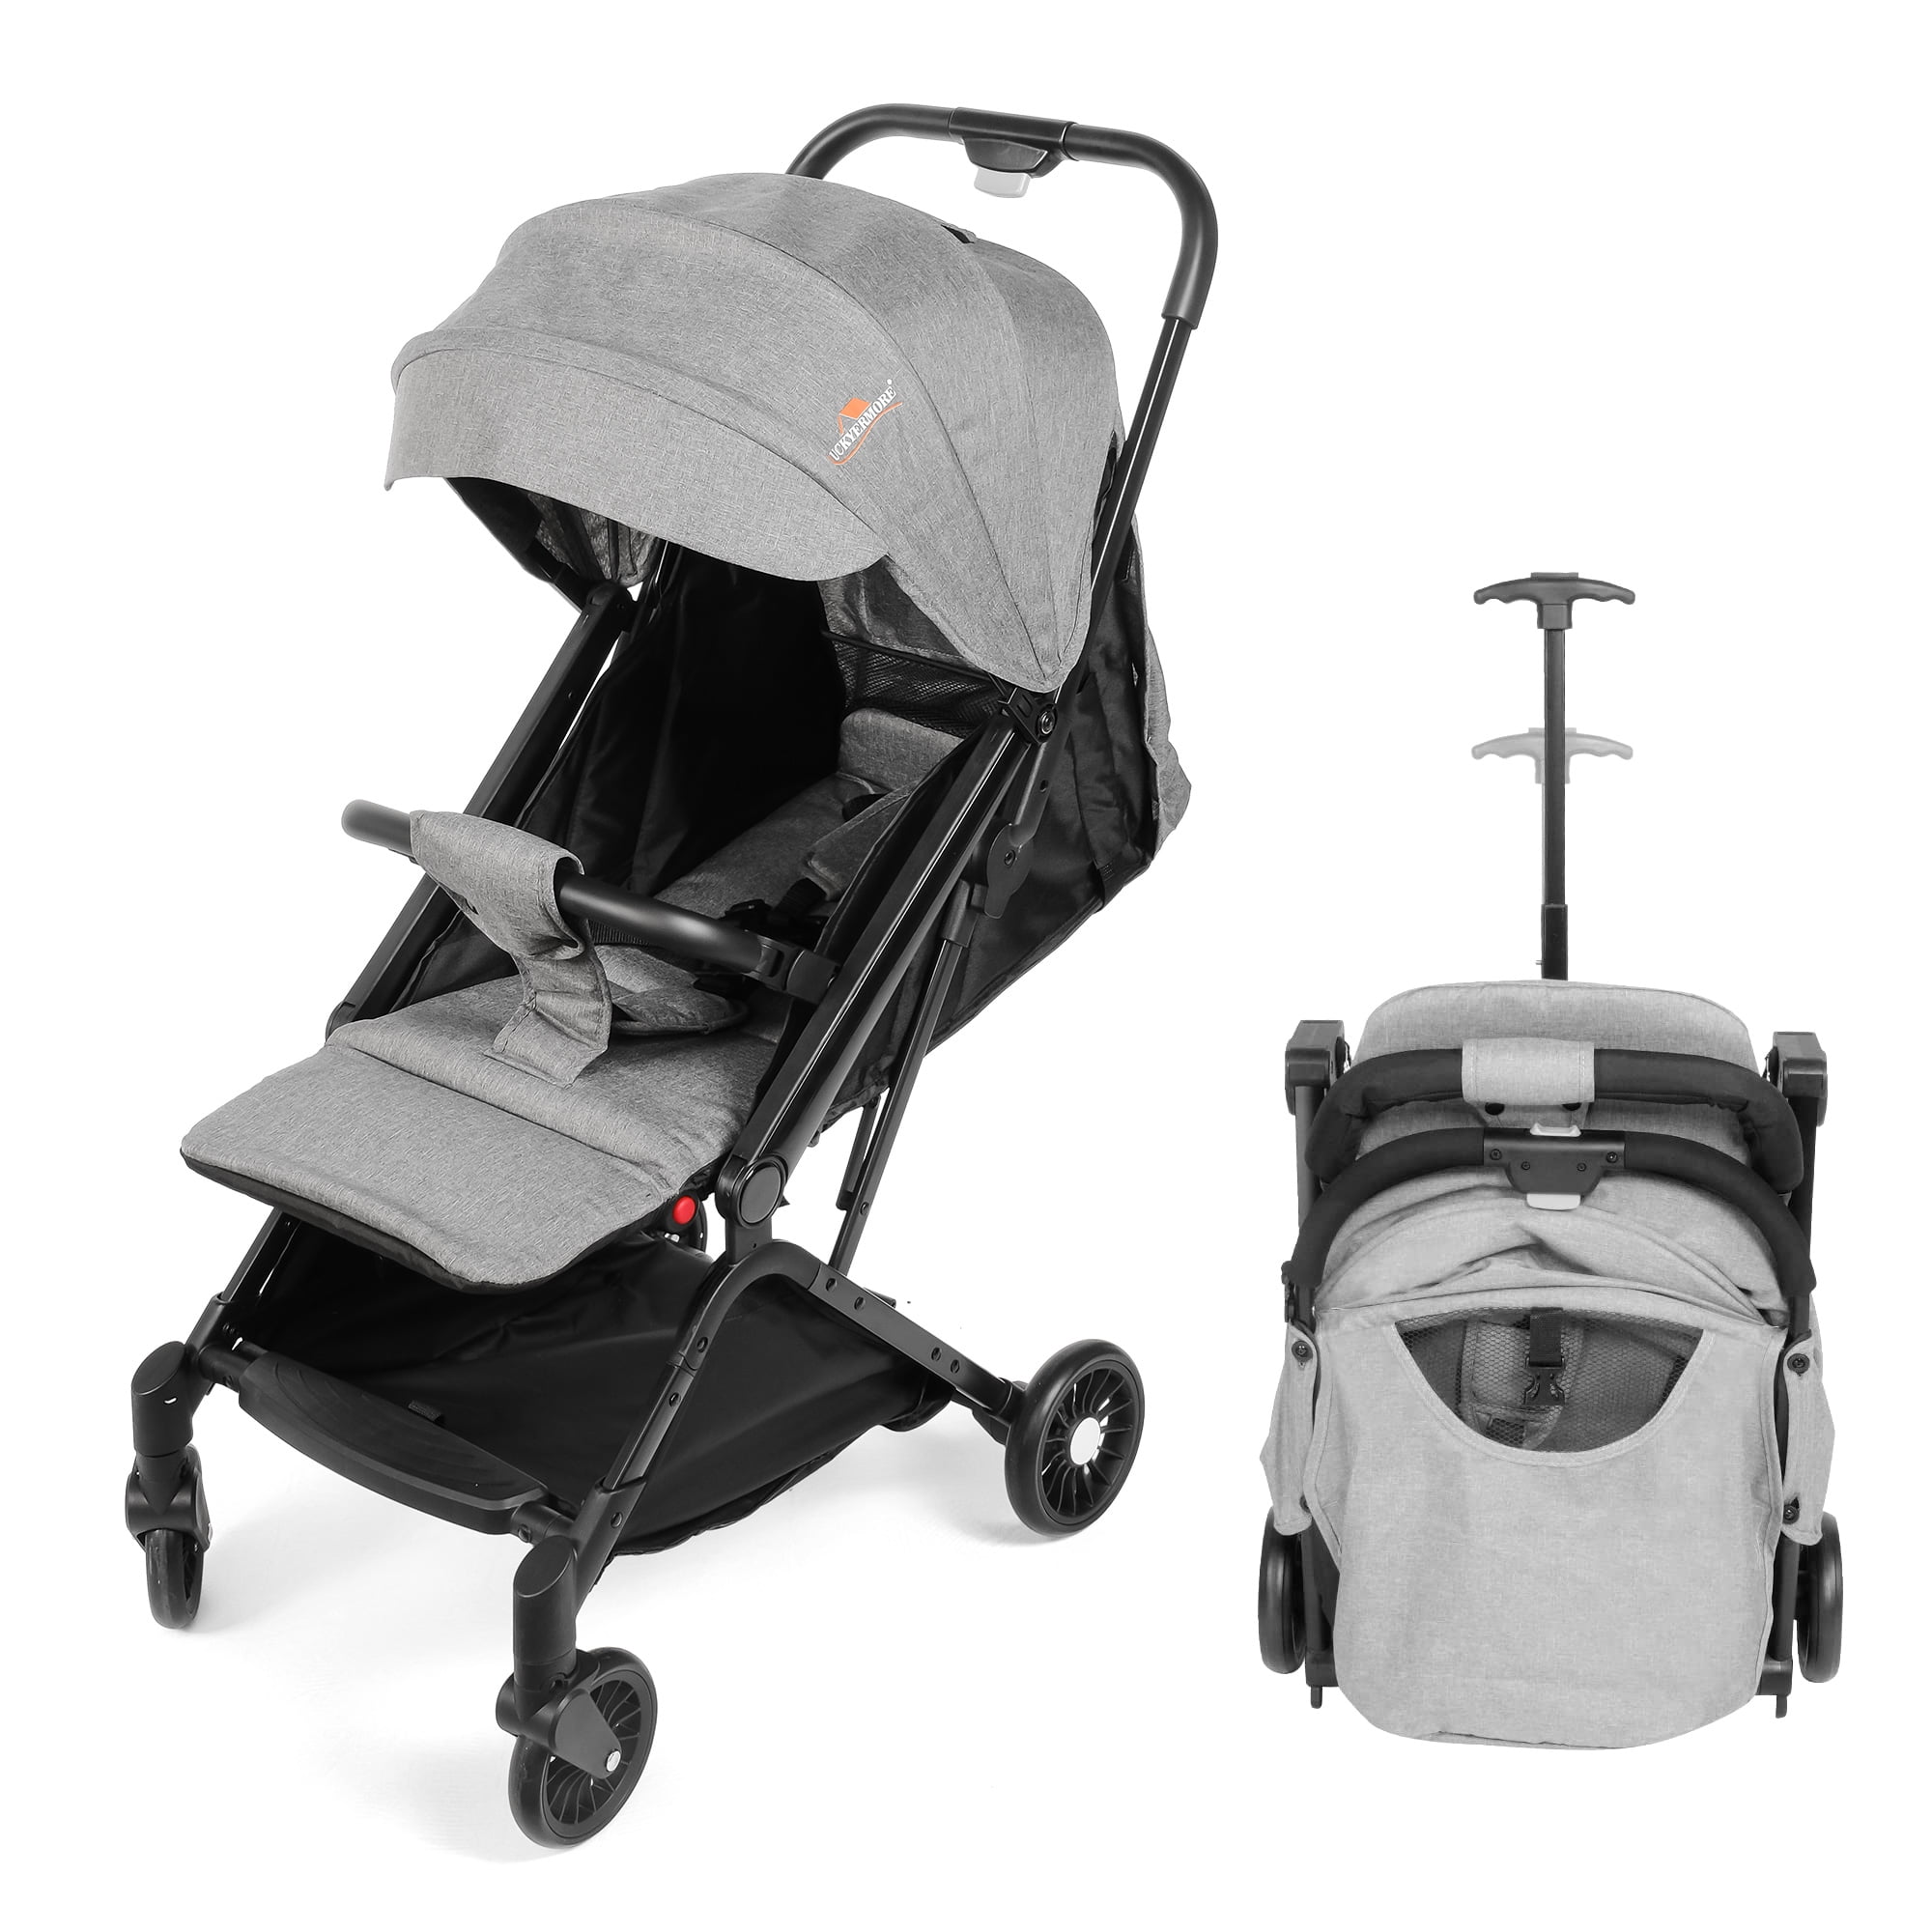 KARMAS PRODUCT Foldable Compact Airplane Travel Strollers Lightweight Baby  Stroller with One-Hand Fold Pushchair Adjustable Canopy and Backrest for  Toddler  Infant, Grey